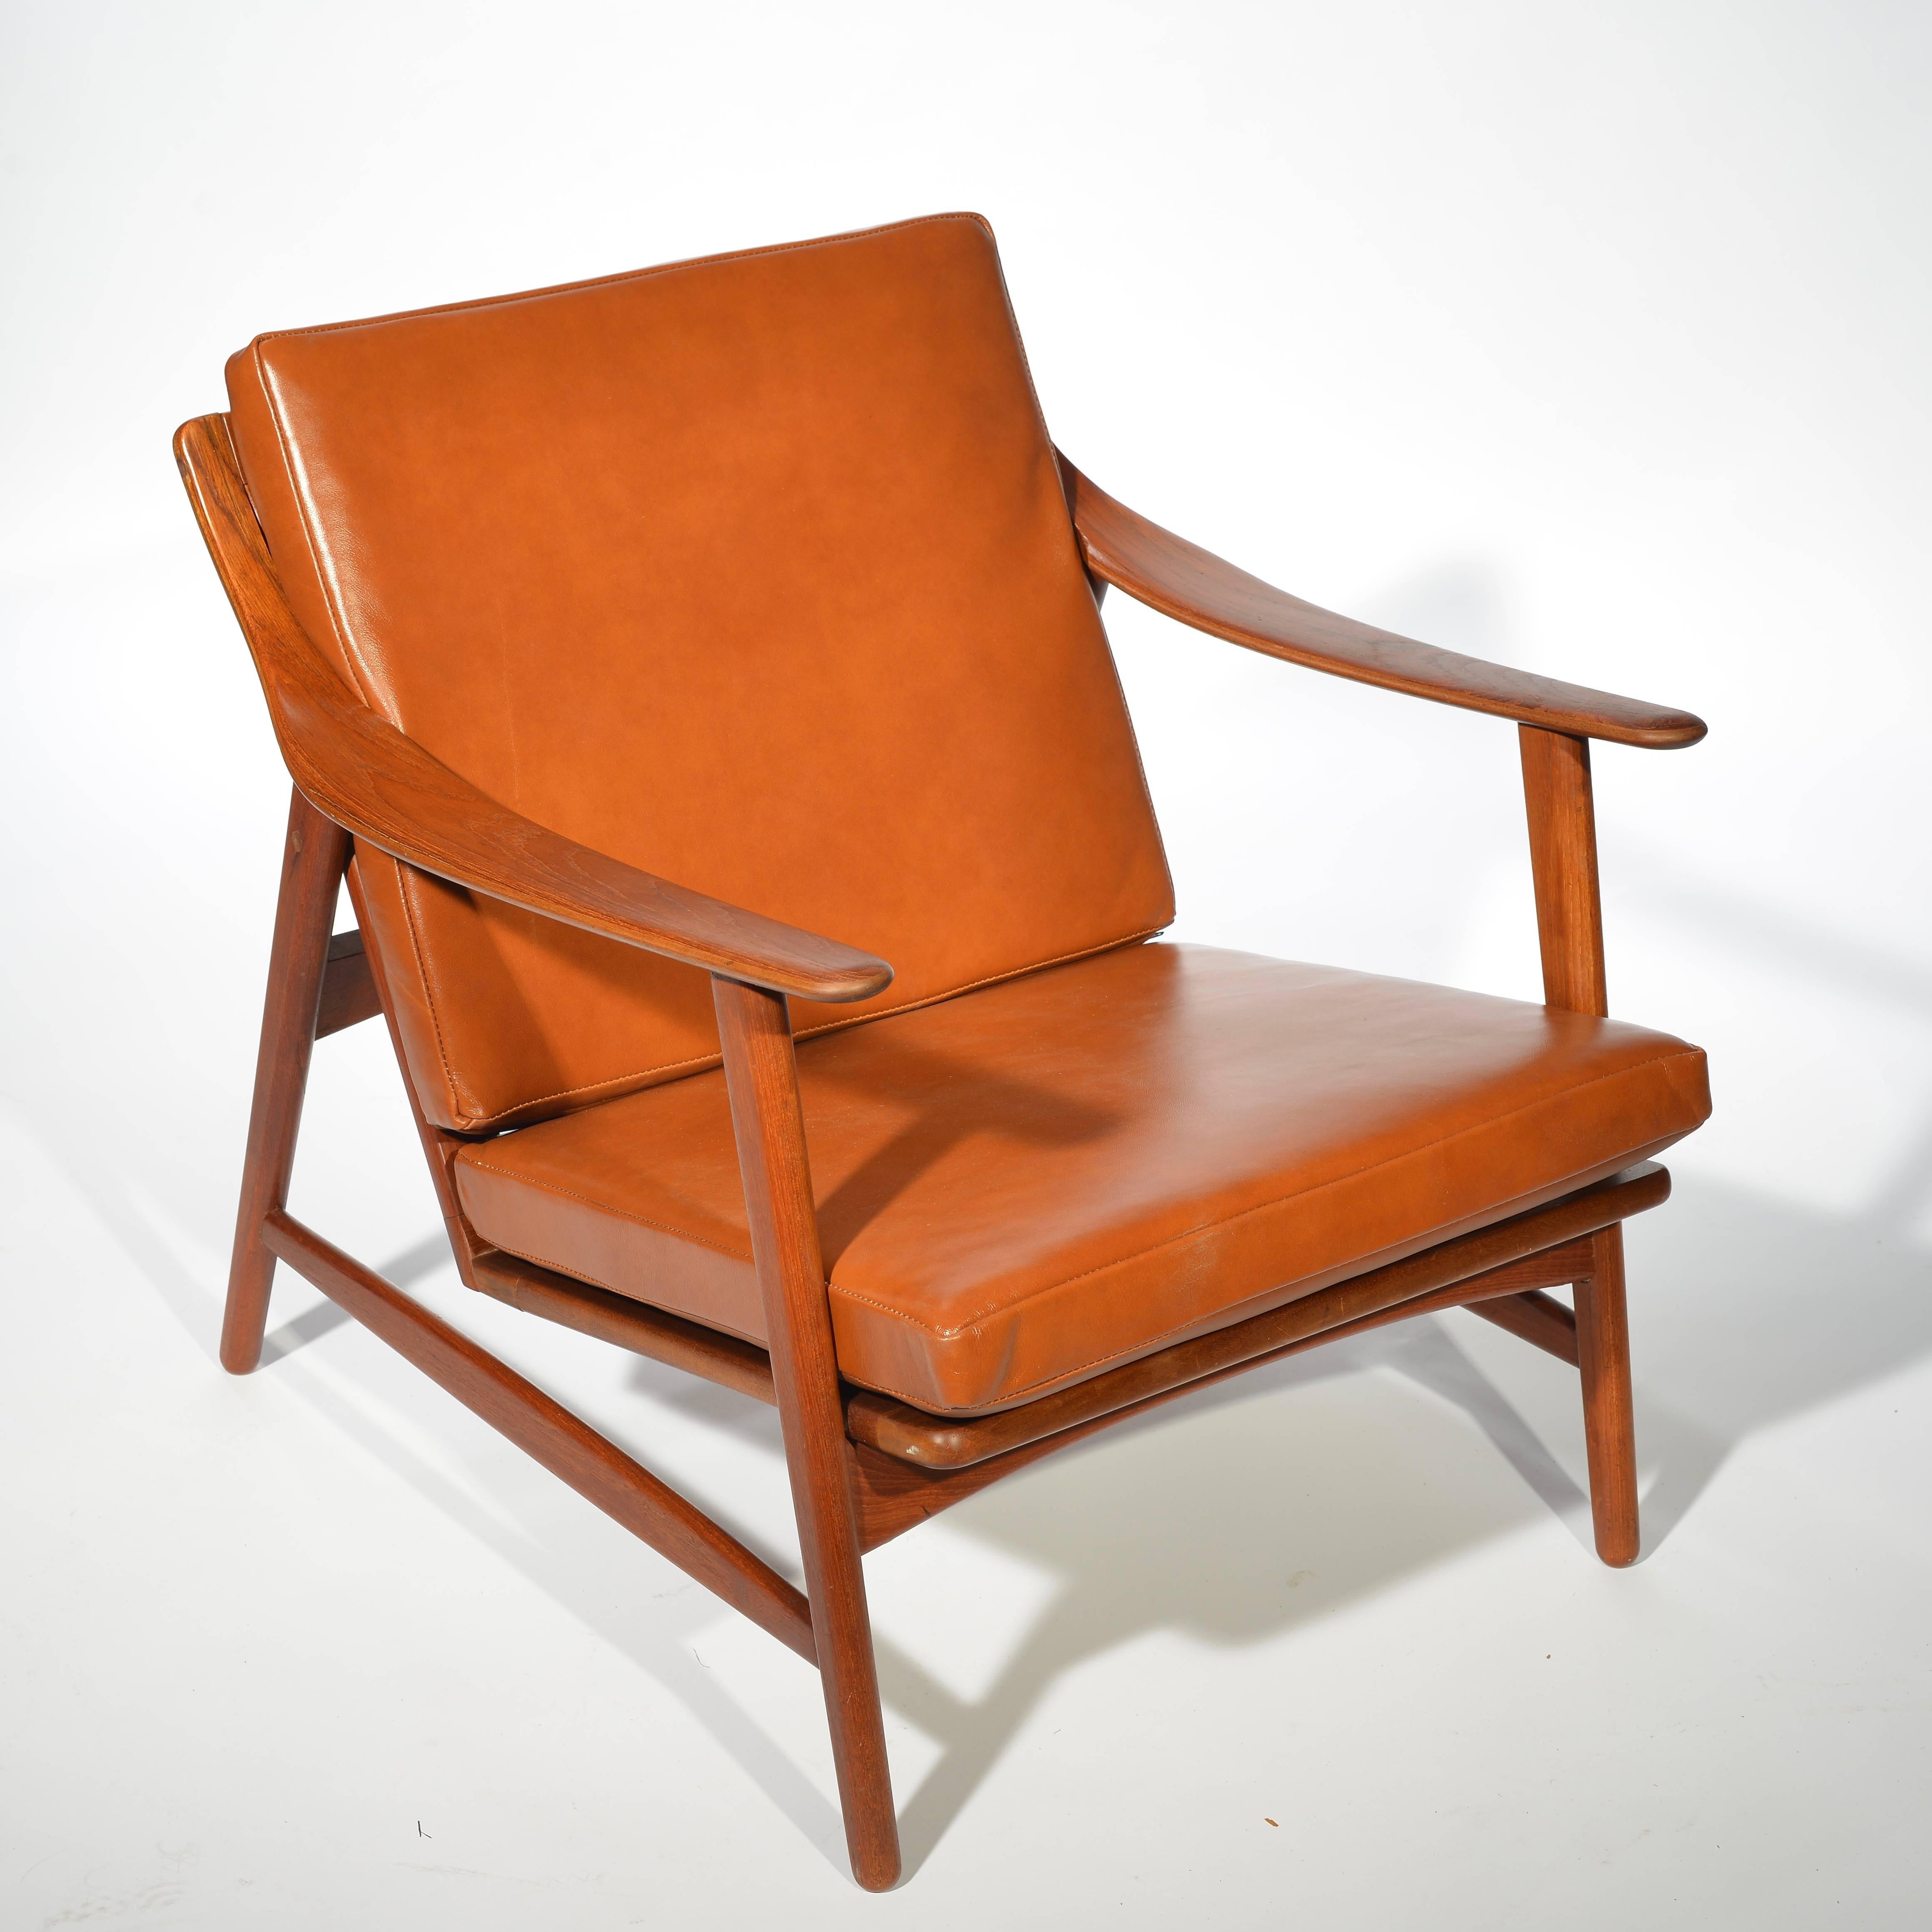 Mid-20th Century Arne Hovmand Olsen for Mogens Kold Lounge Chairs in Teak and Leather